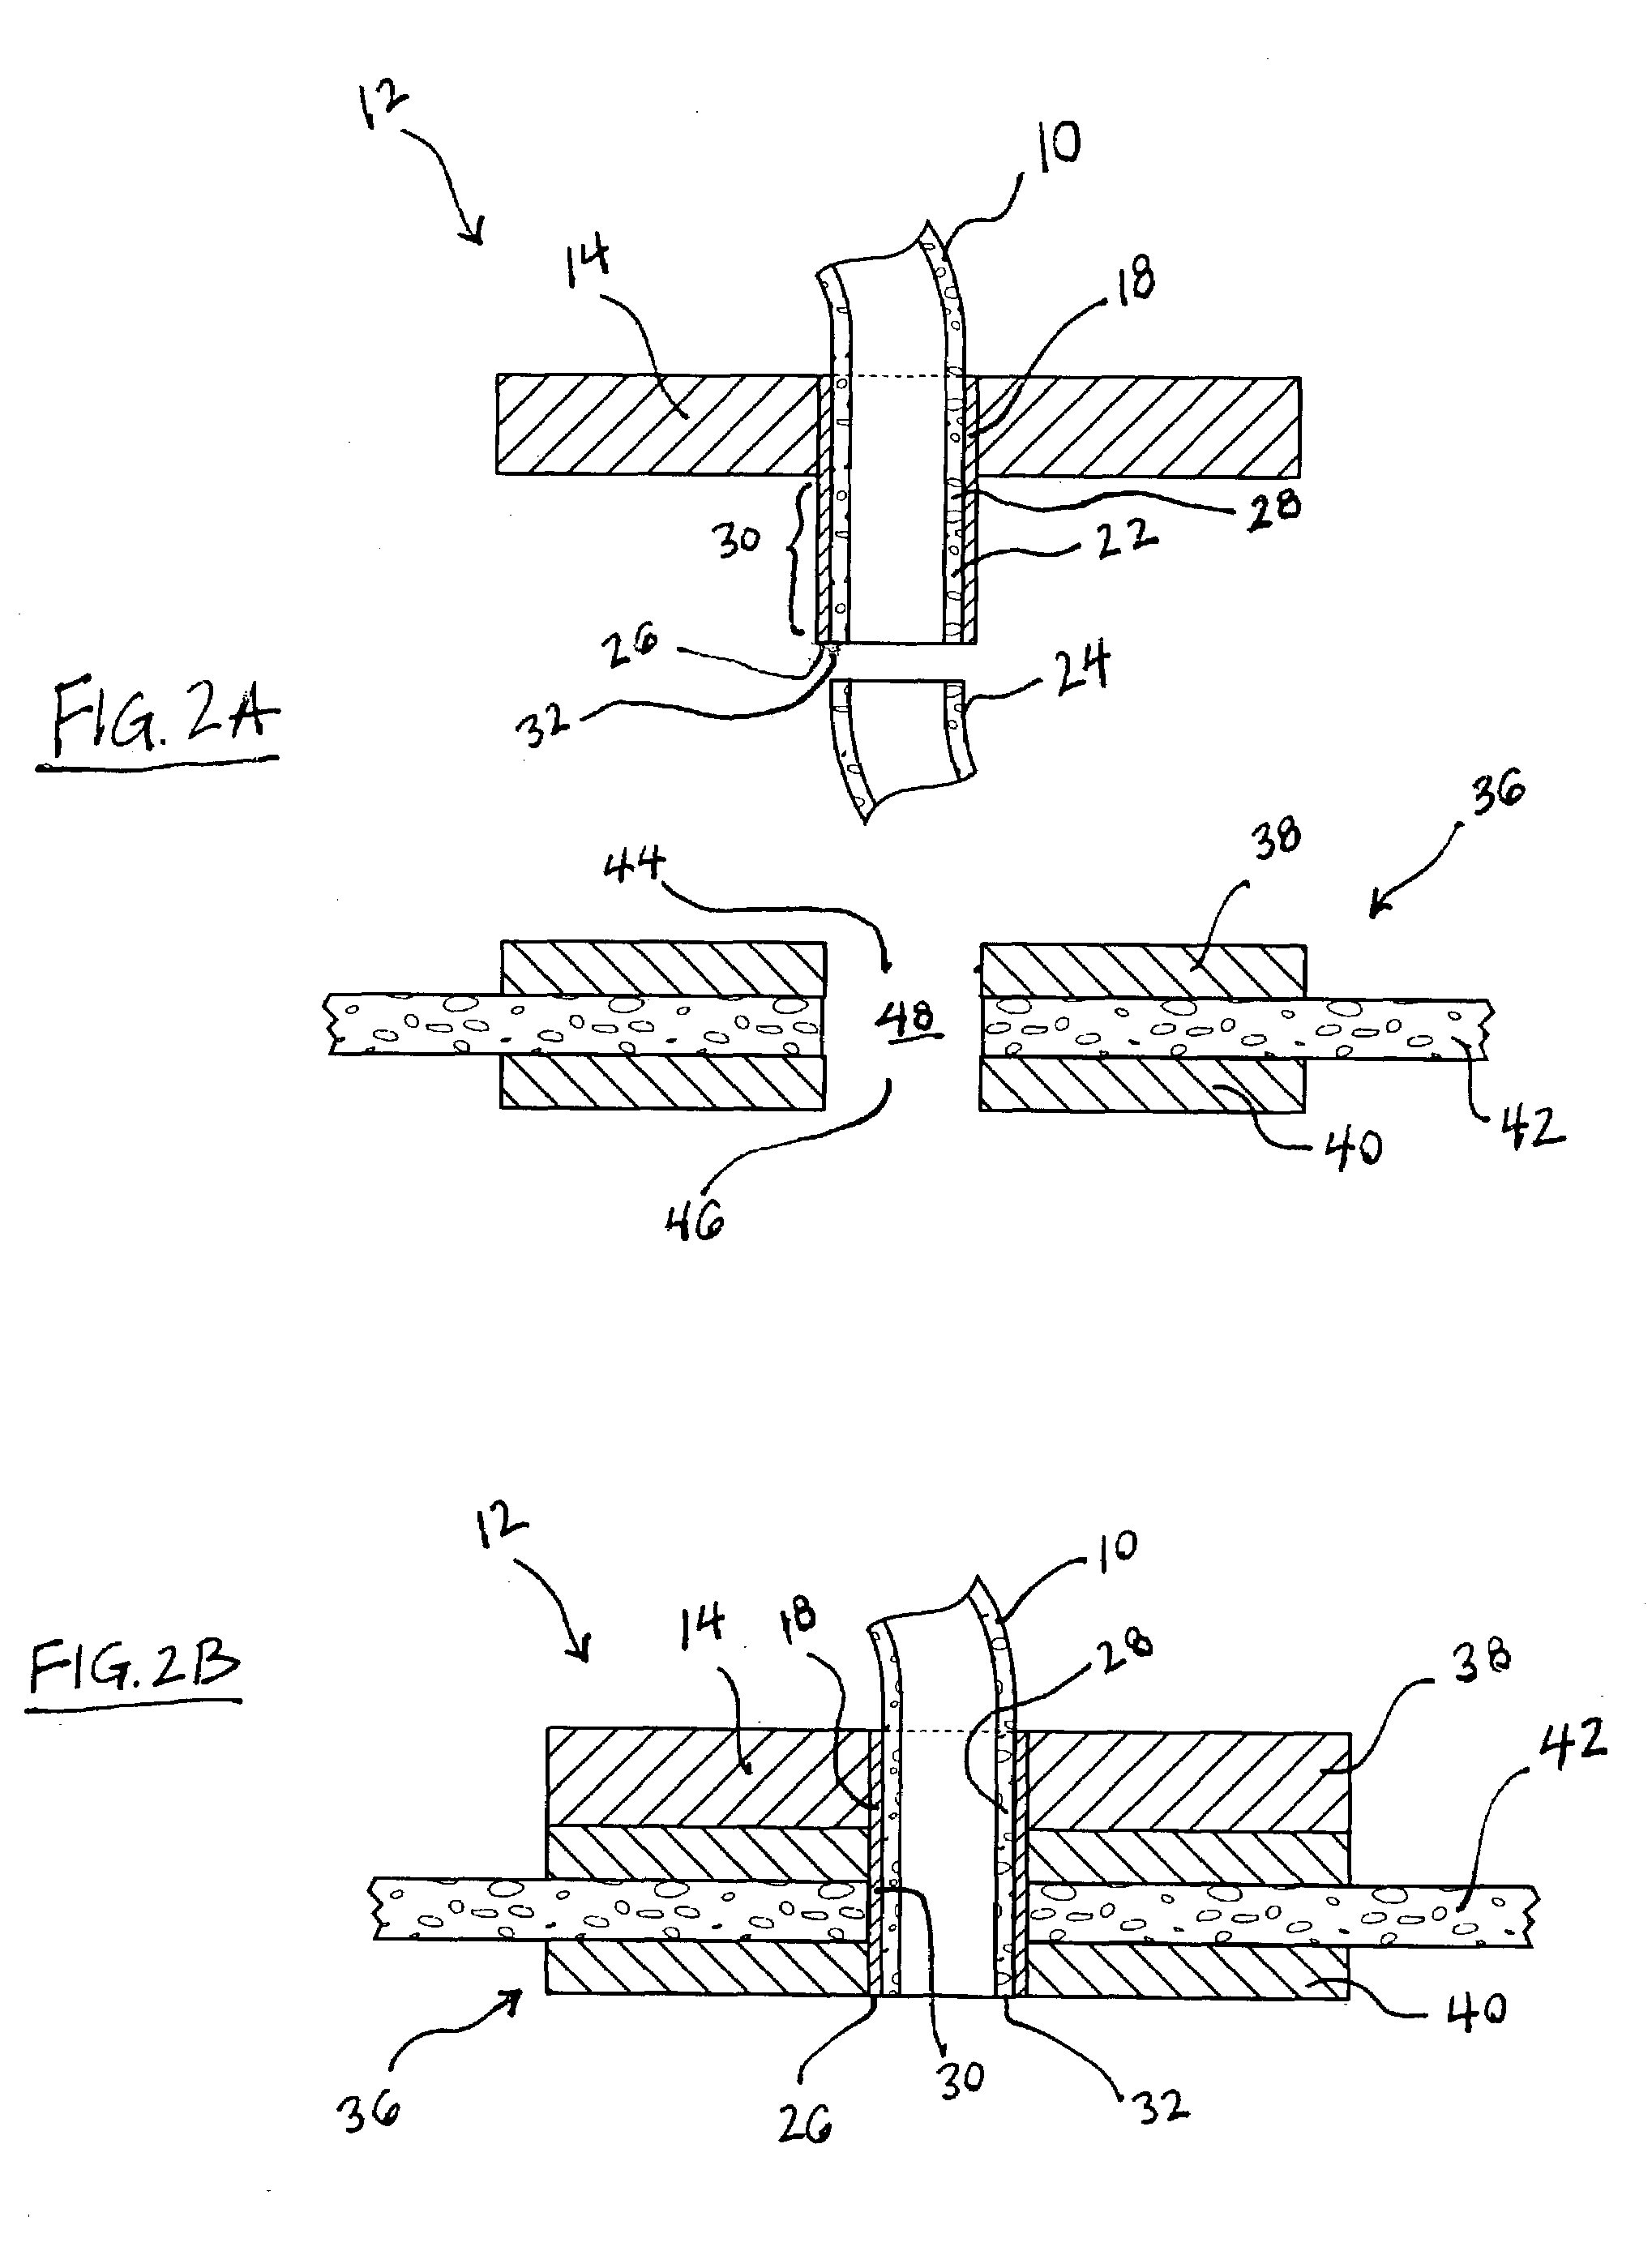 Components, systems and methods for forming anastomoses using magnetism or other coupling means